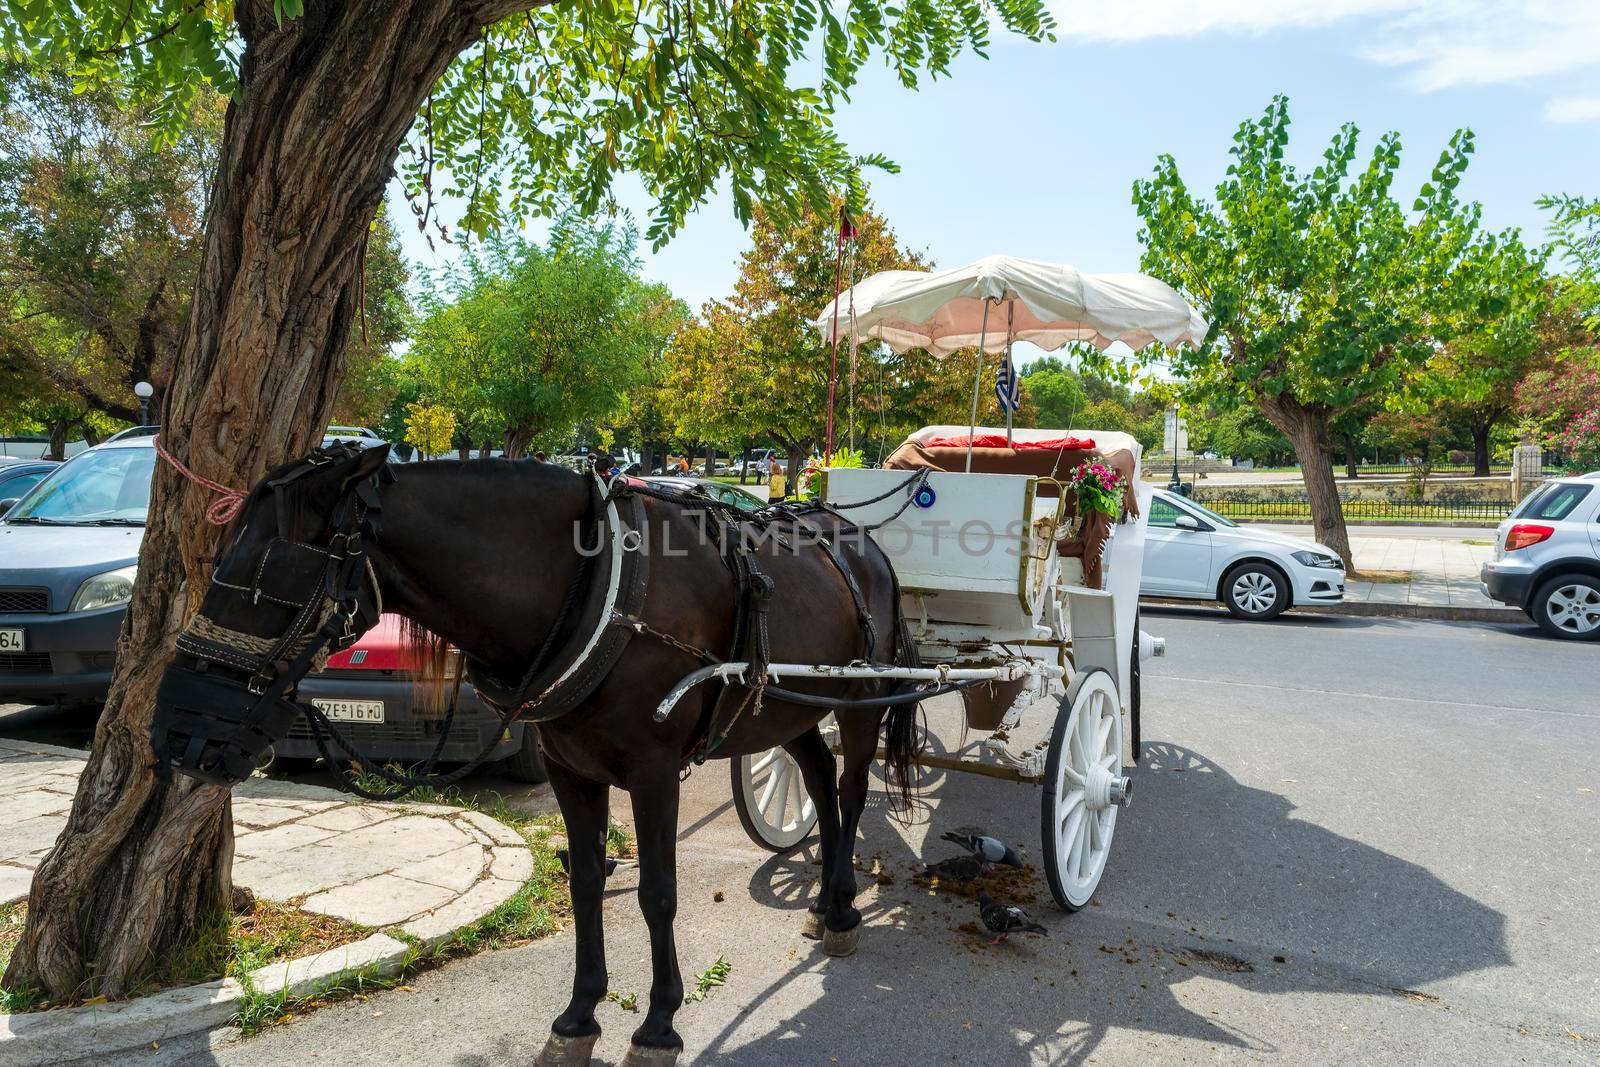 Corfu, Greece - August 25, 2018: Old horse carriage in the old town of Corfu - Greece